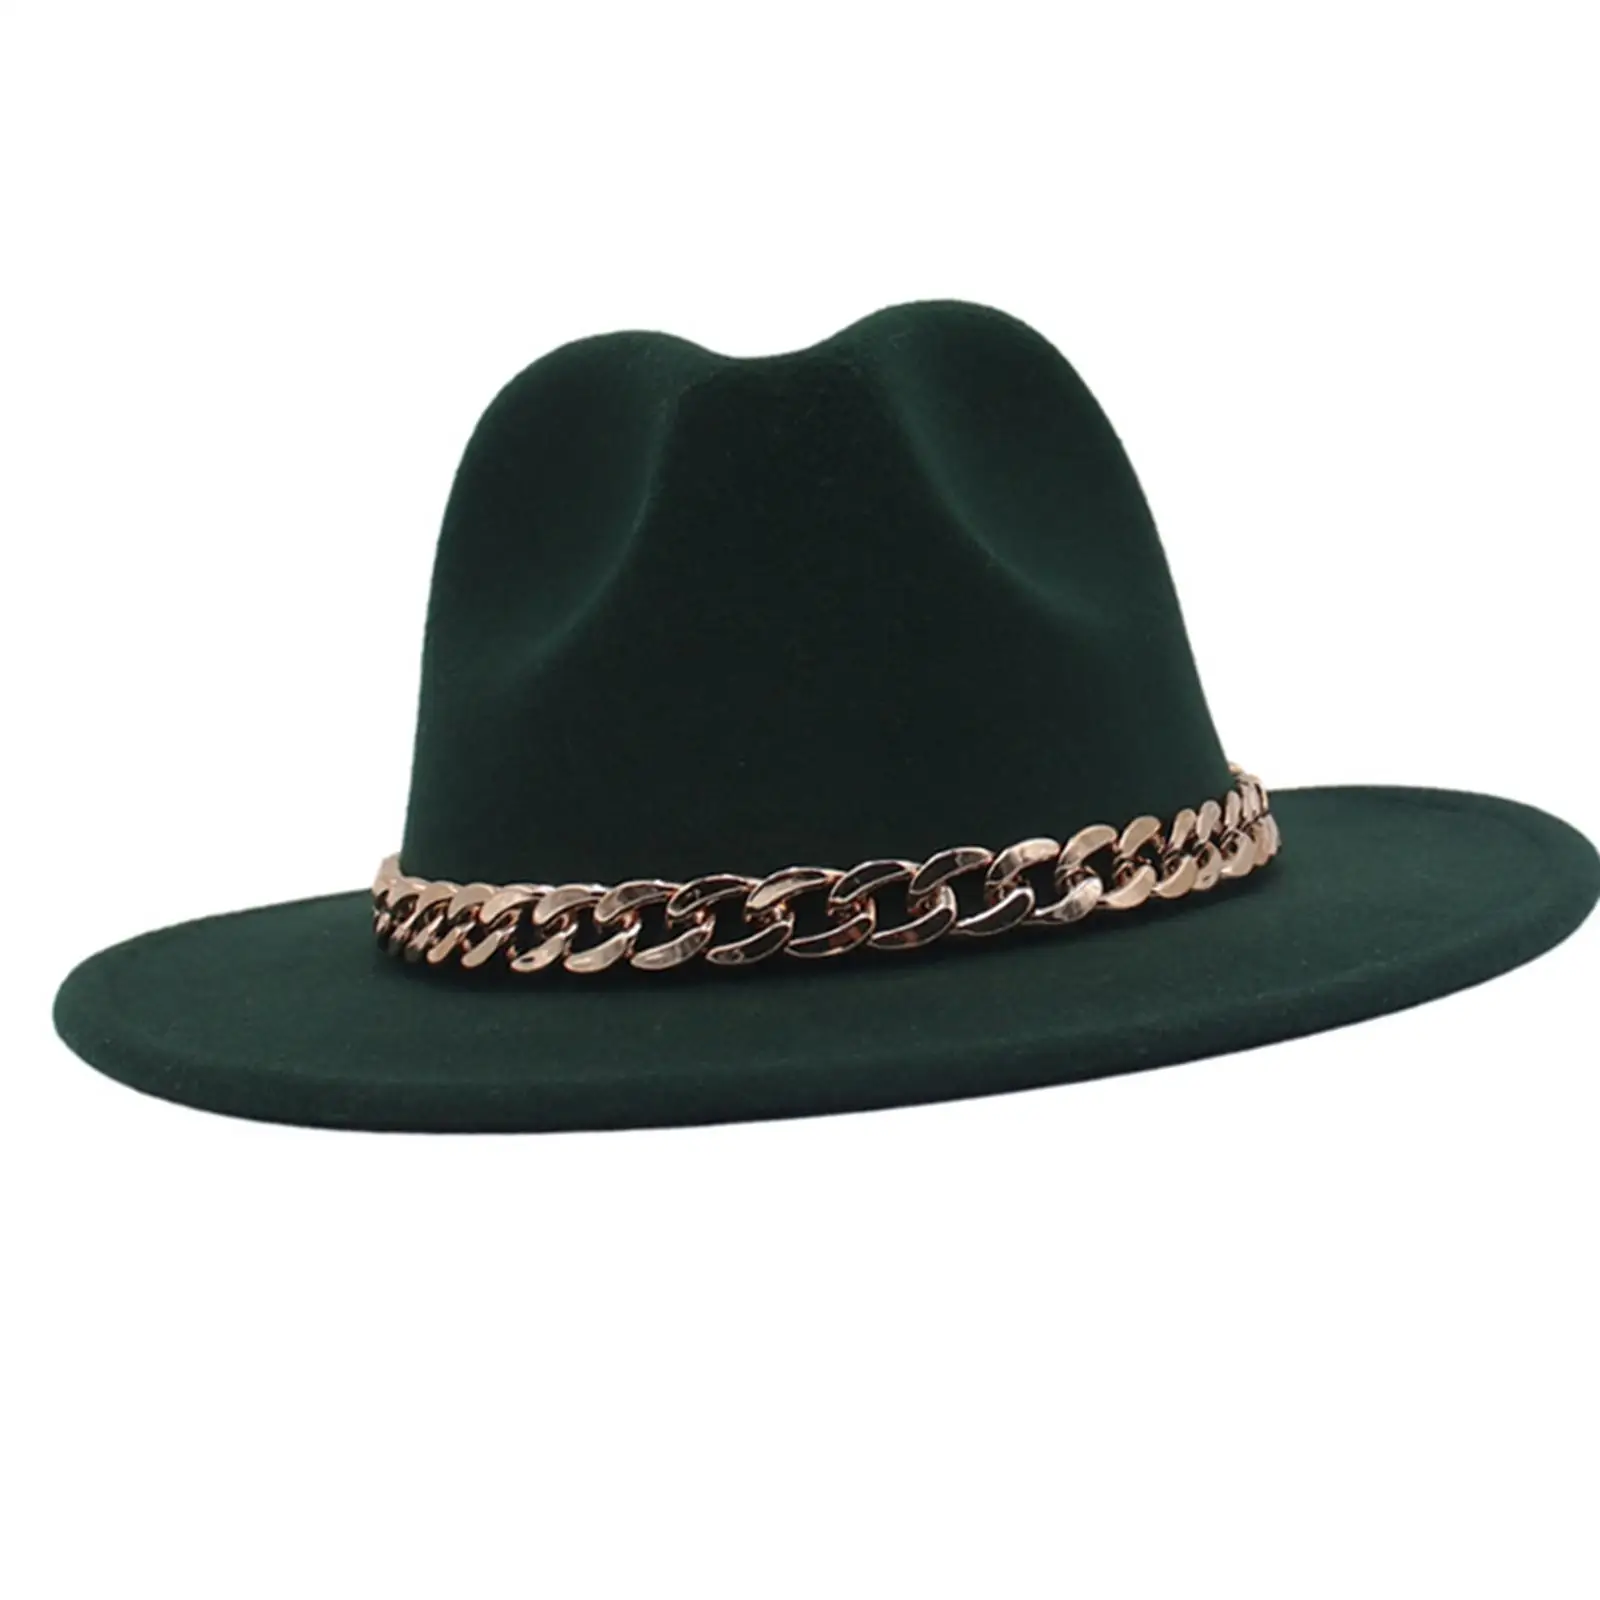 Elegant  Hat with Chain One Size Big Brim Classic Fashionable  Panama Breathable Luxury Hat for women Outdoors Church Ladies